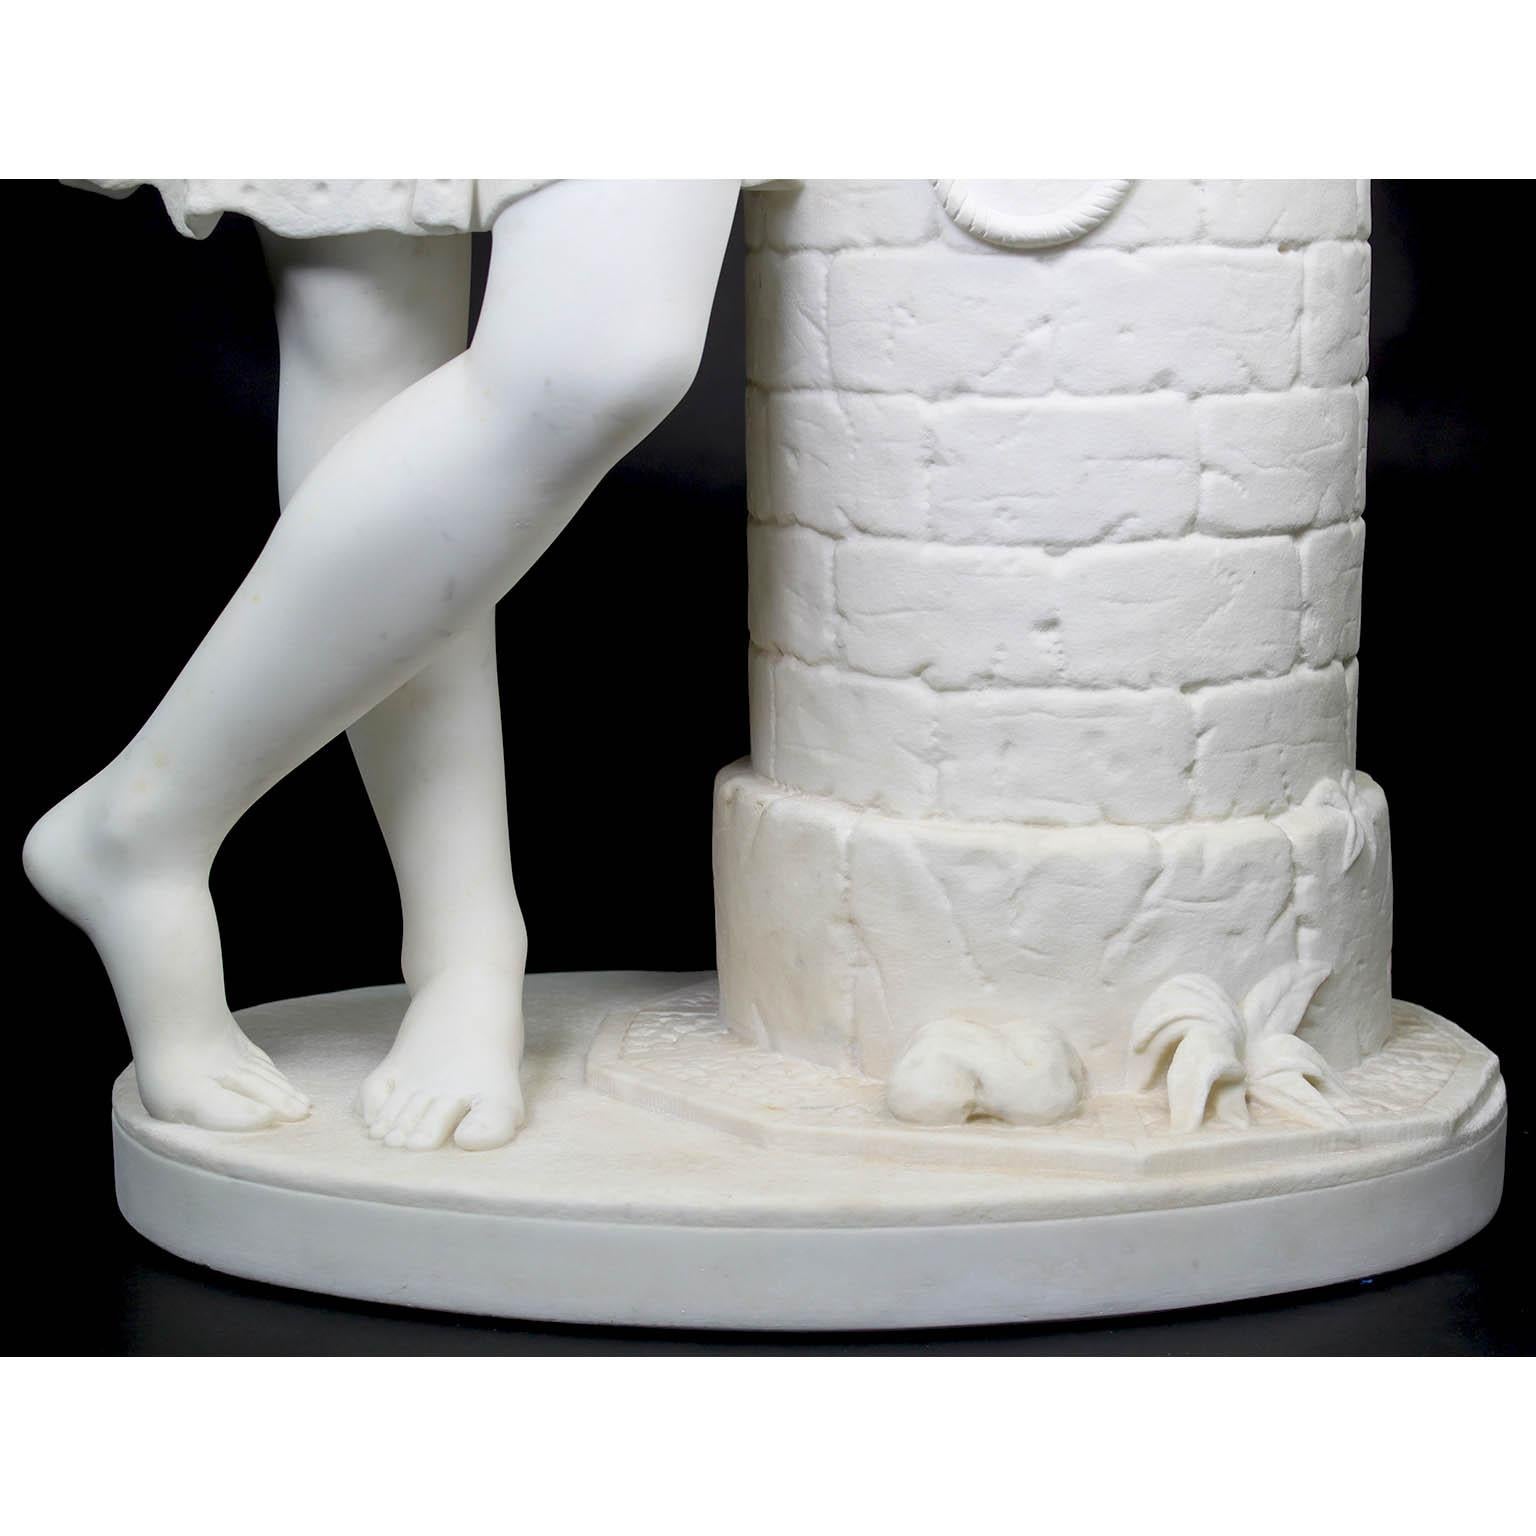 Fine 19th Century White Marble Sculpture of “Rebecca at the Well” For Sale 5